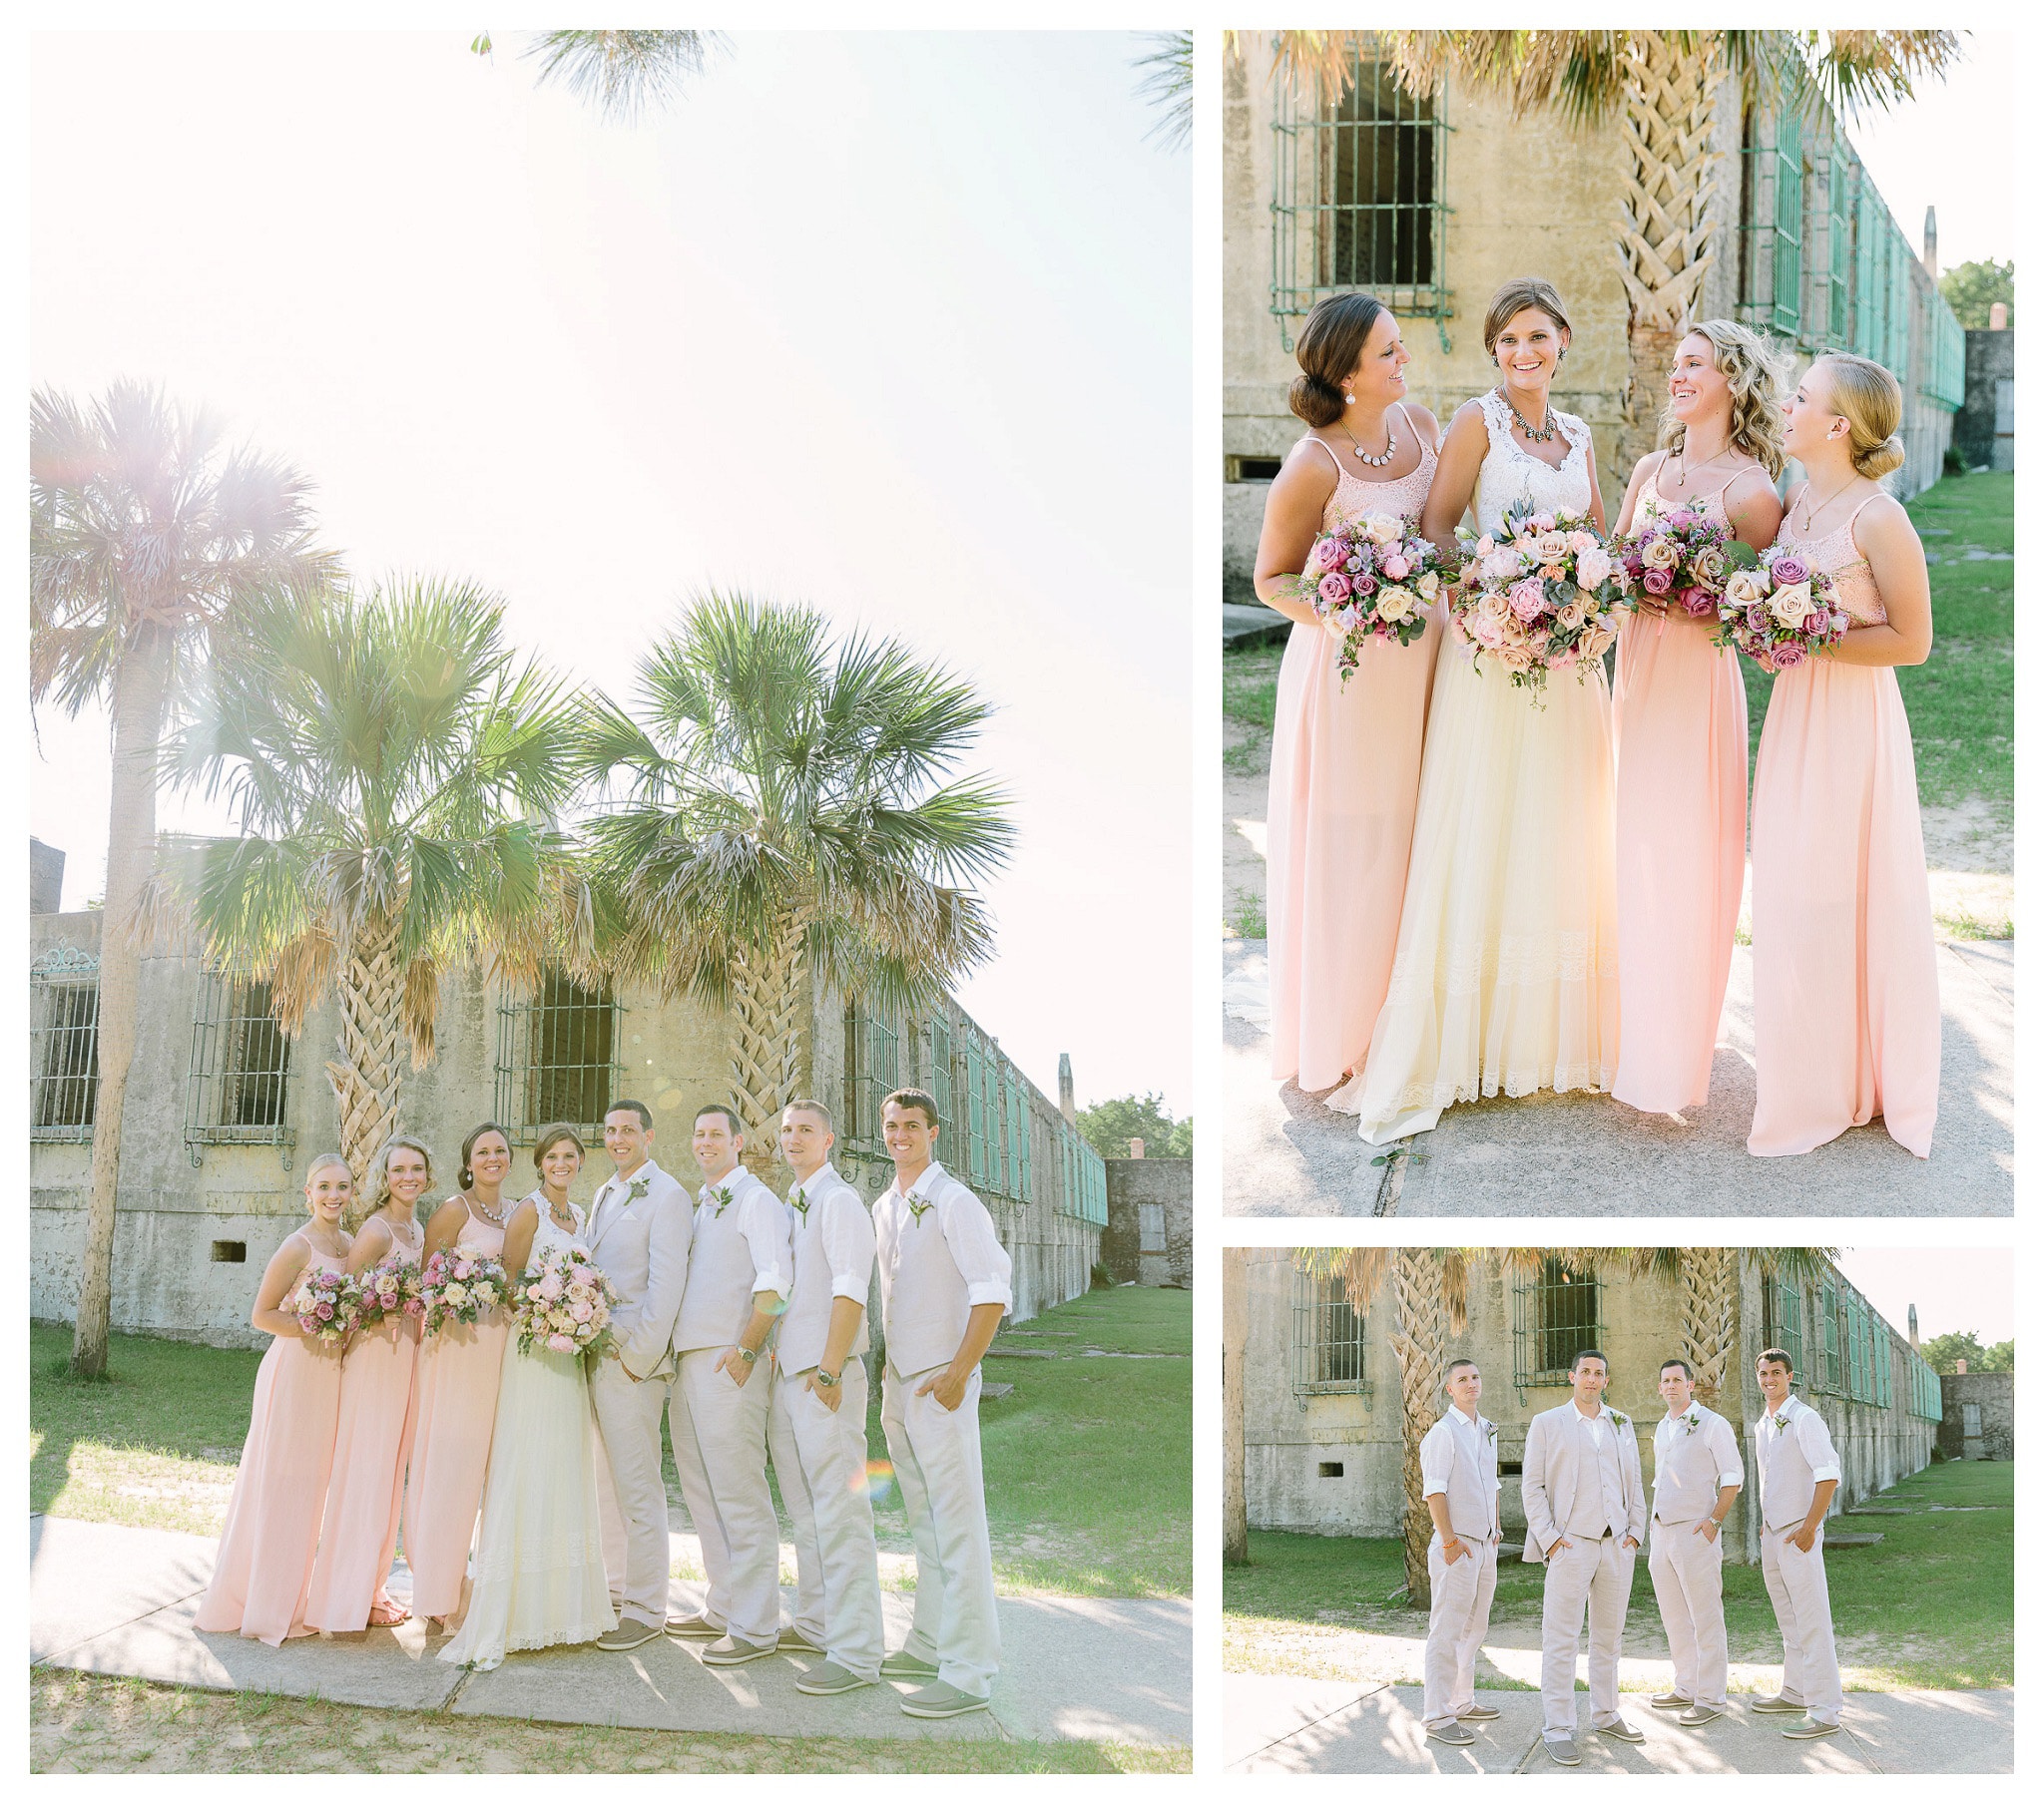 Bridesmaids, Bride, Groom and Groomsmen posing in front of the venue - Venue - Beach House Gulf Stream Breeze, Beach Realty Catering and Cake - Buttercream Cakes and Catering, LLC Flowers - Callas Florist Event Rentals - Event Works DJ - Scott Shaw